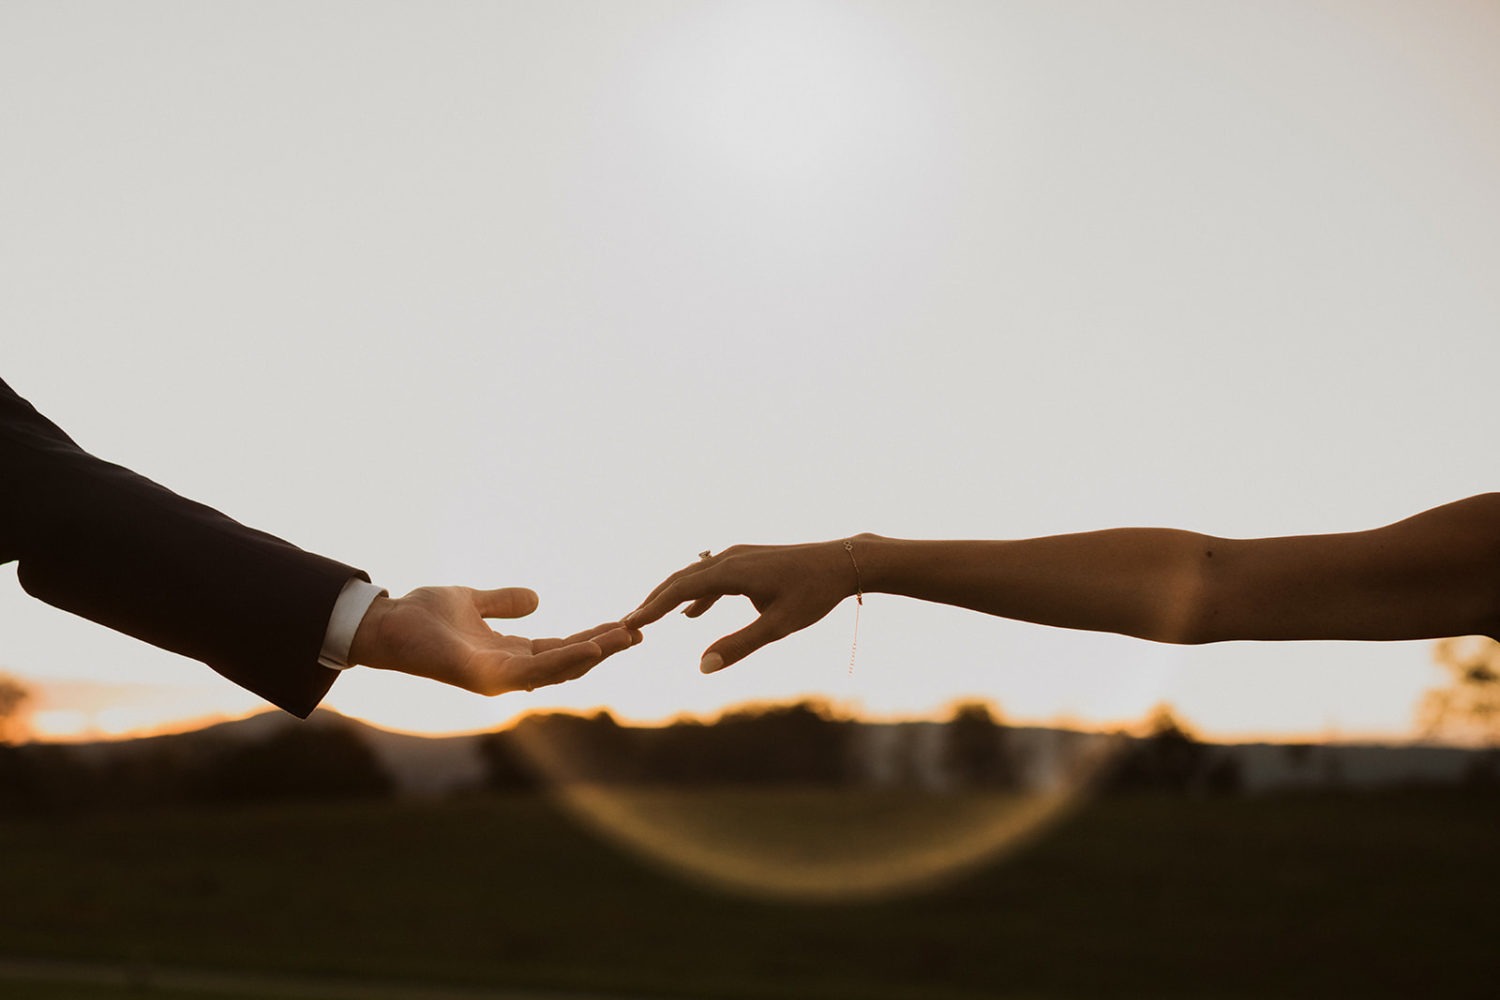 couple reaches for each other's hands with setting sun in background